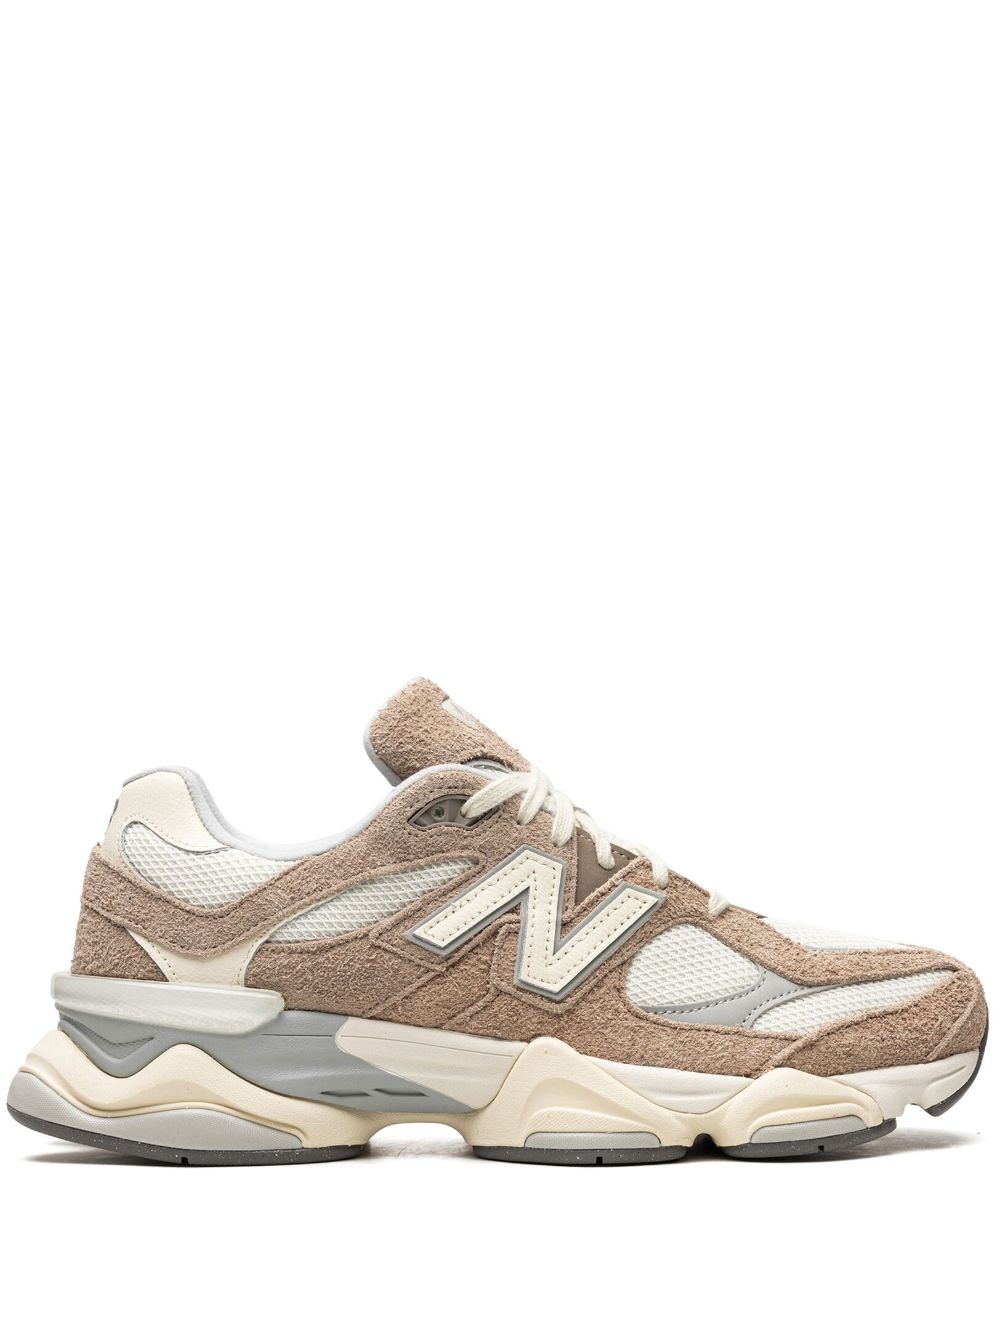 New Balance 9060 "Driftwood" sneakers - Brown